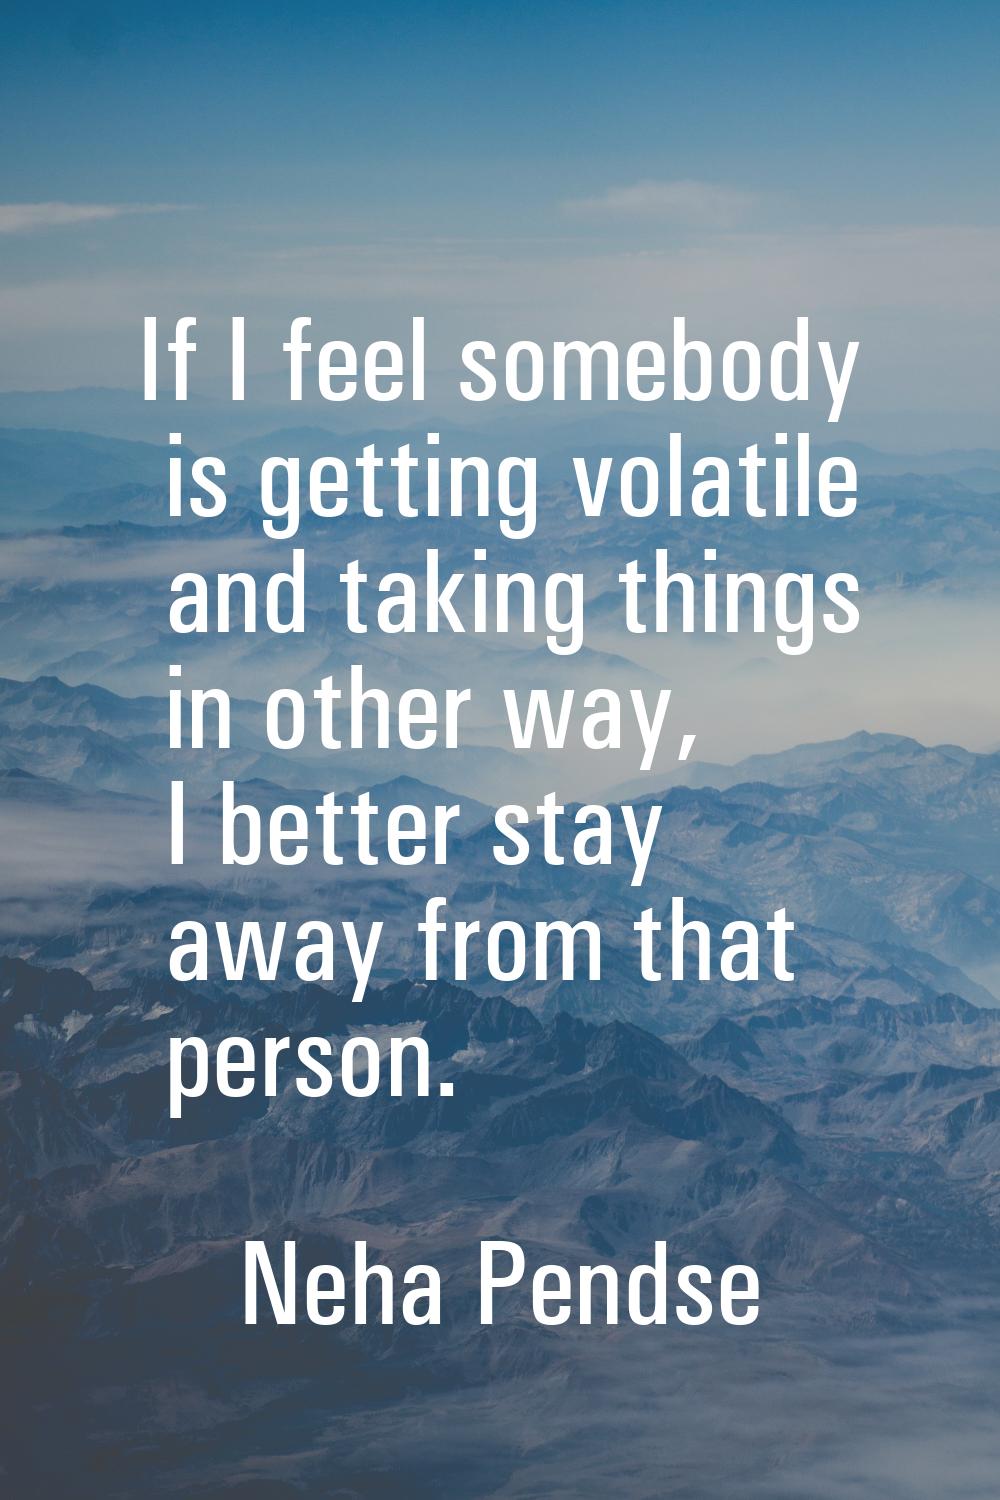 If I feel somebody is getting volatile and taking things in other way, I better stay away from that